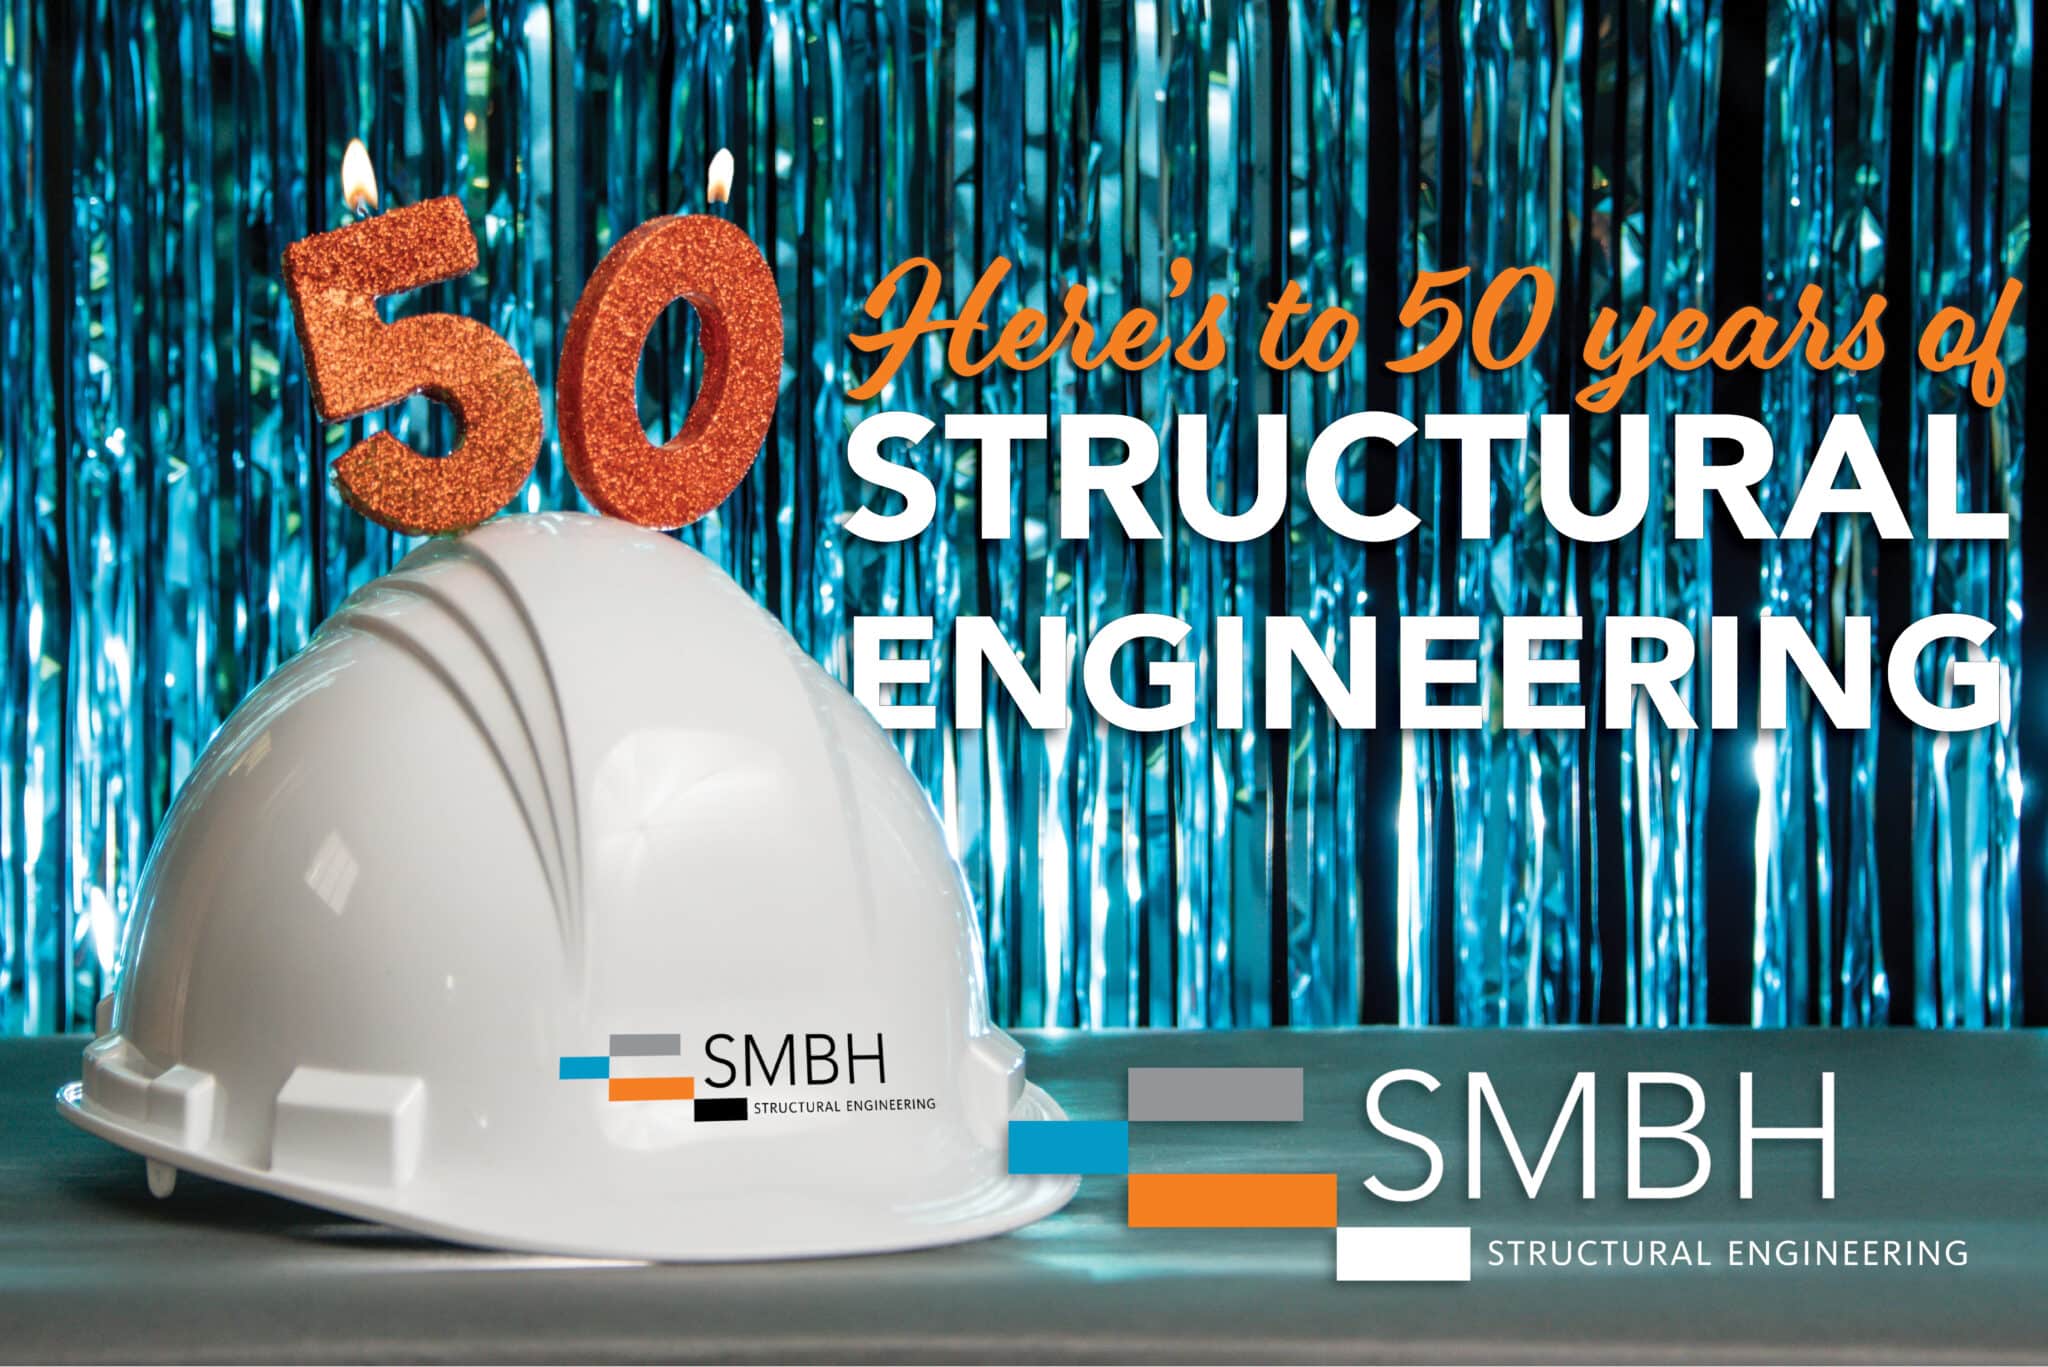 A white SMBH hard hat with sparkly orange candles in the shape of an 5 and a 0 on a shiny fringe background.